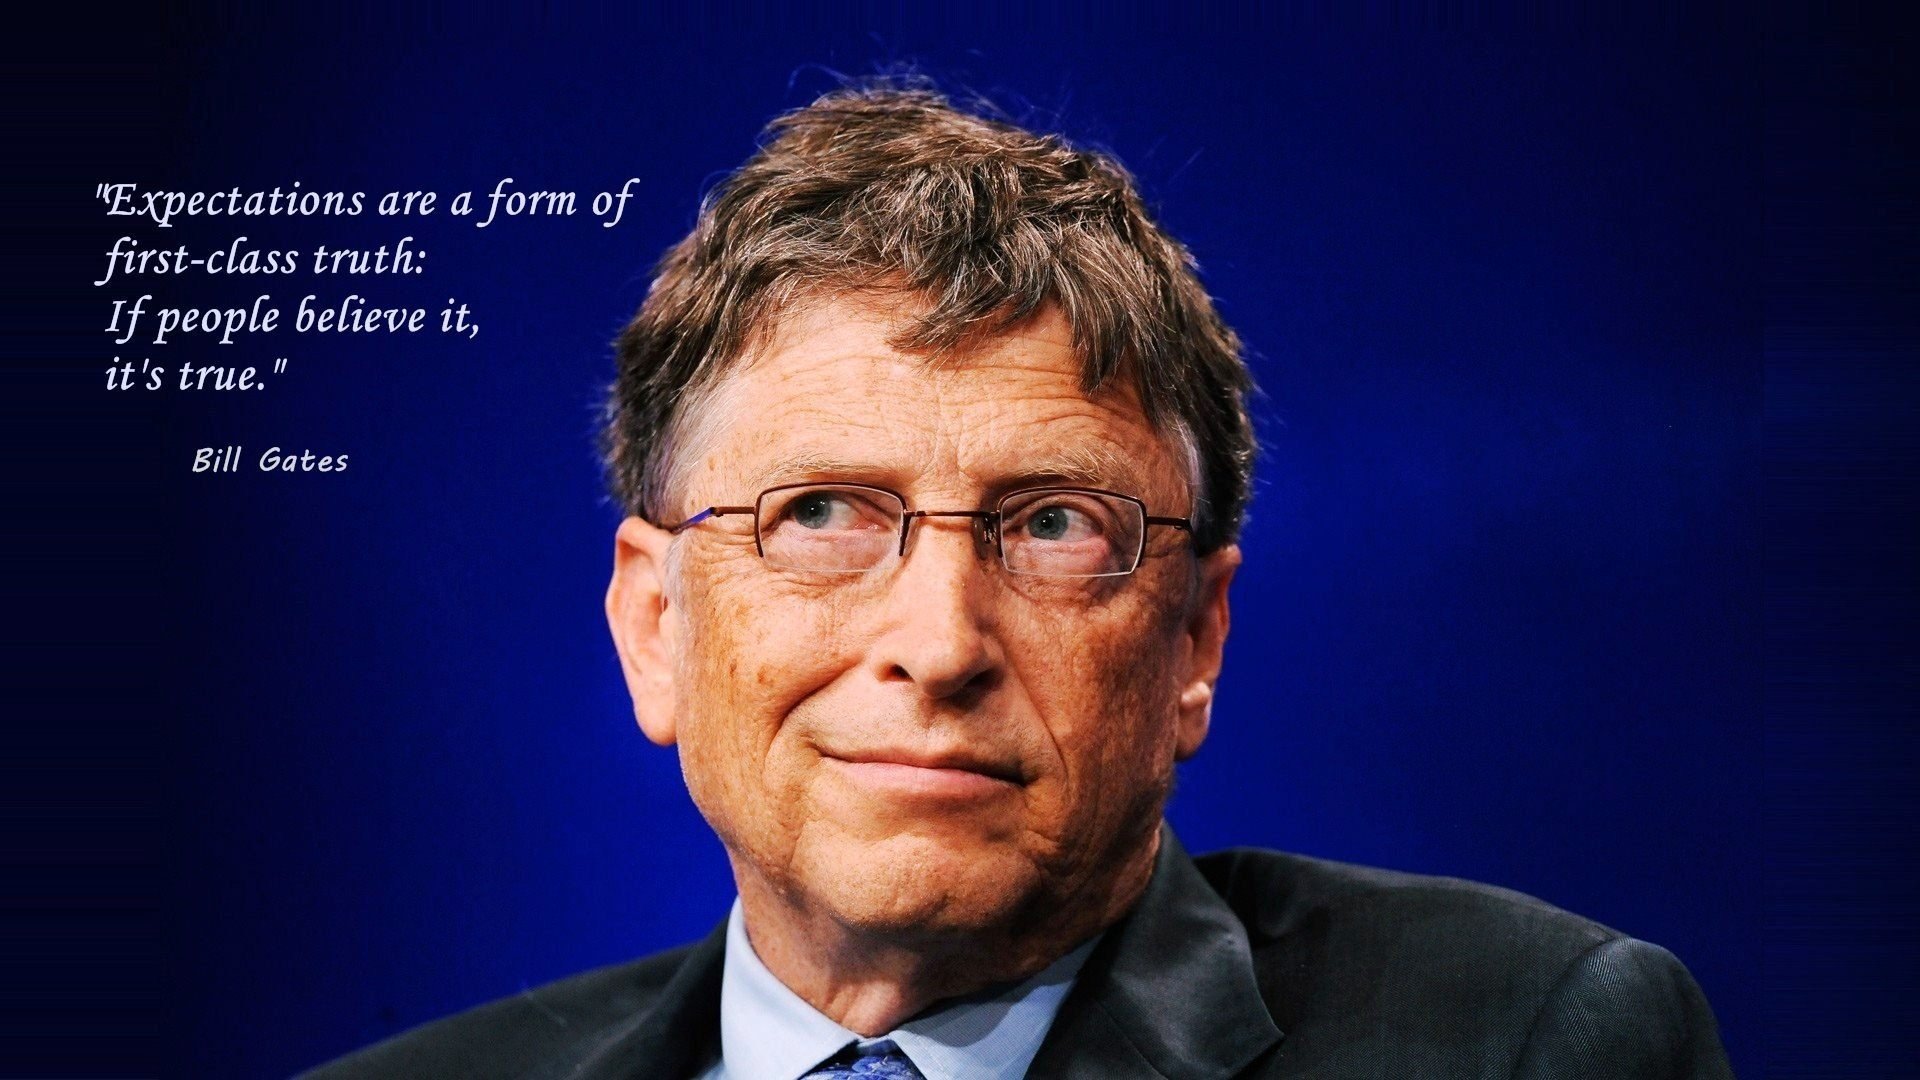 Bill Gates Wallpapers   HD Wallpapers Backgrounds of Your 1920x1080